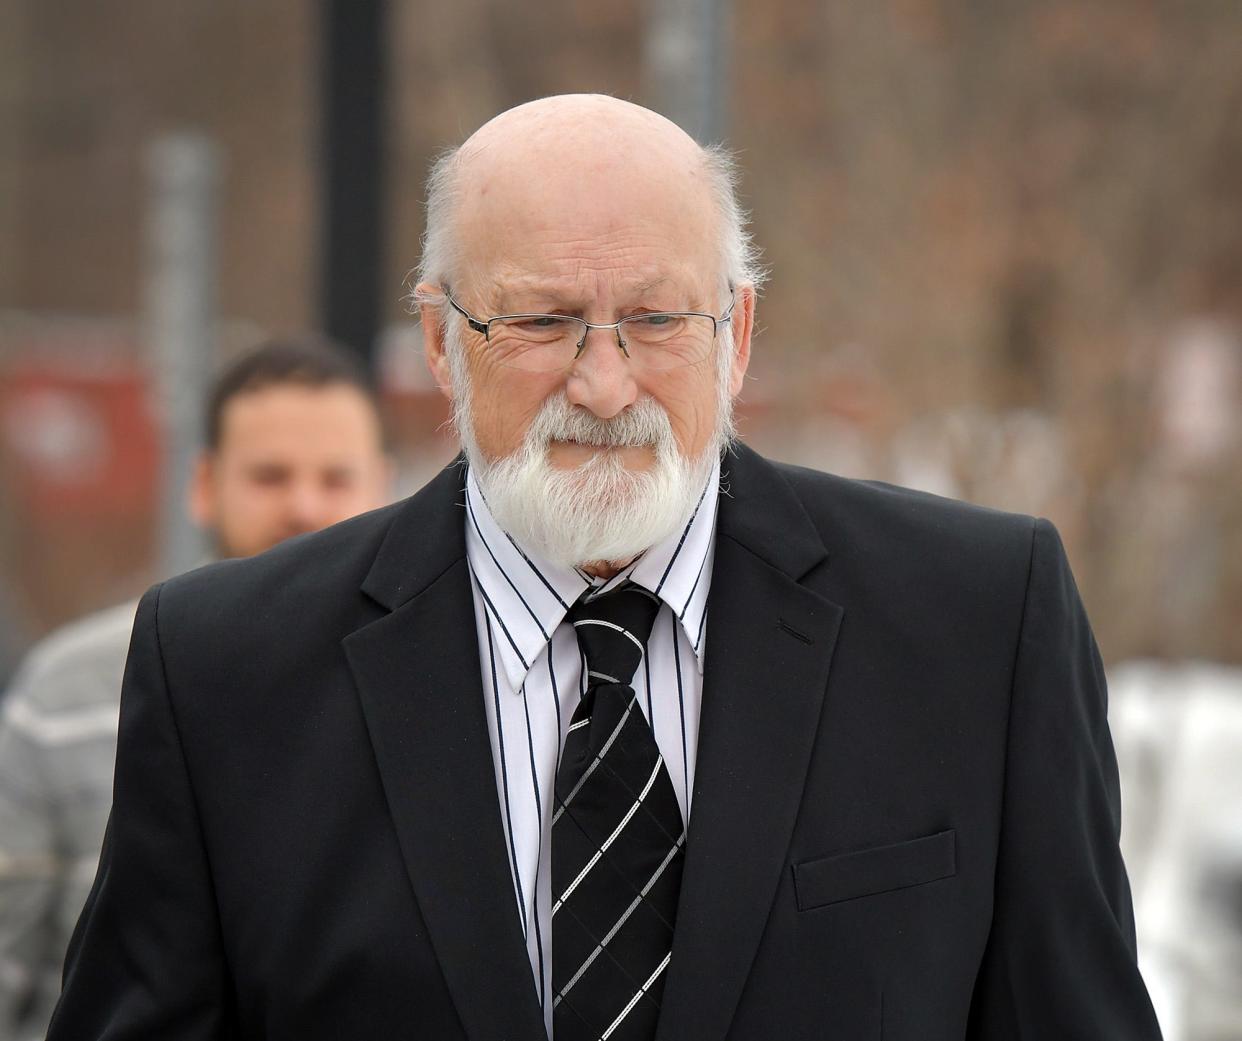 Raymond Blouin, during a 2019 appearance in Dudley District Court.